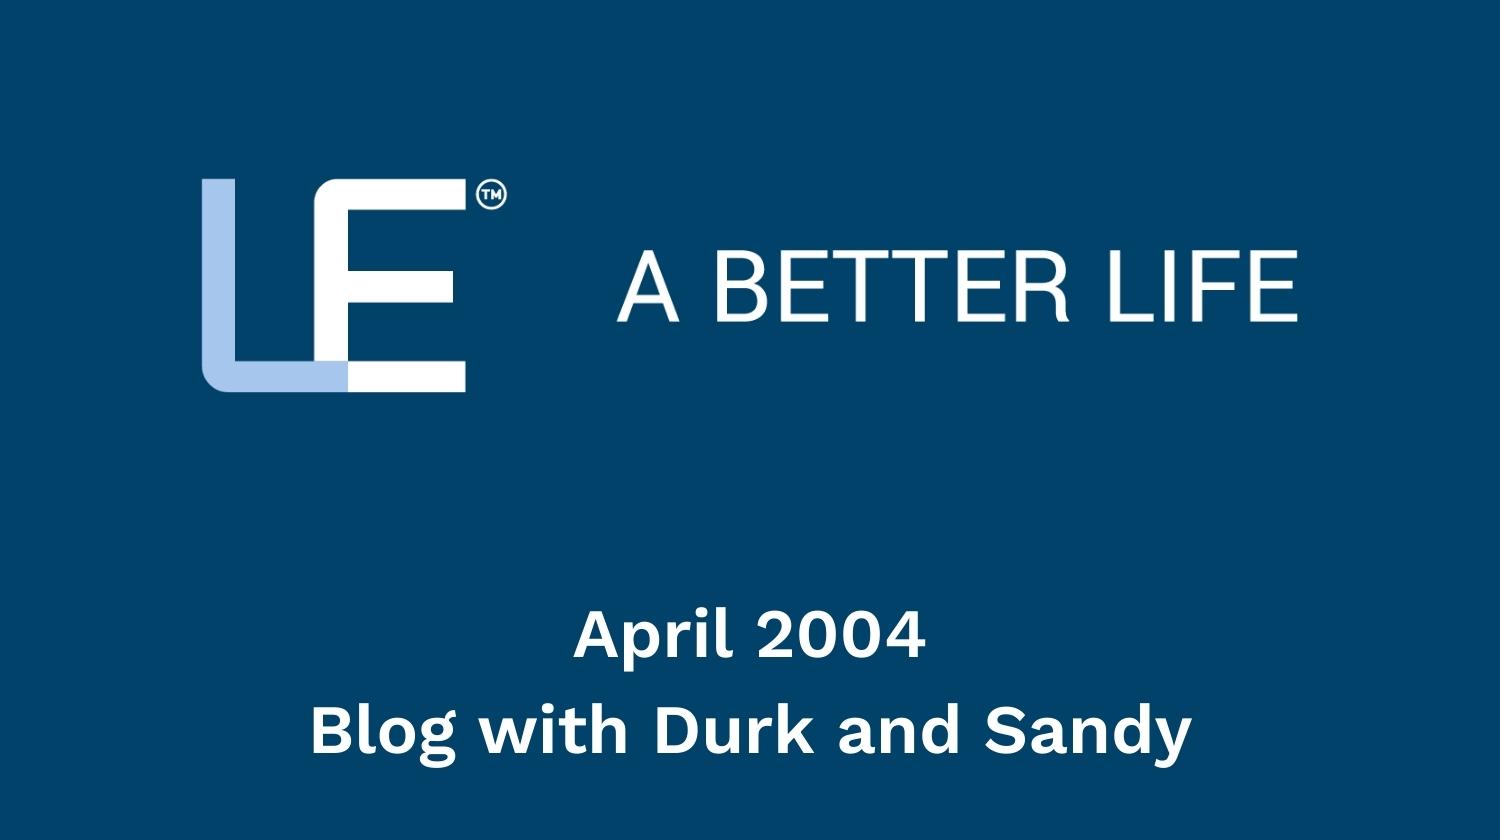 April 2004 Blog with Durk and Sandy